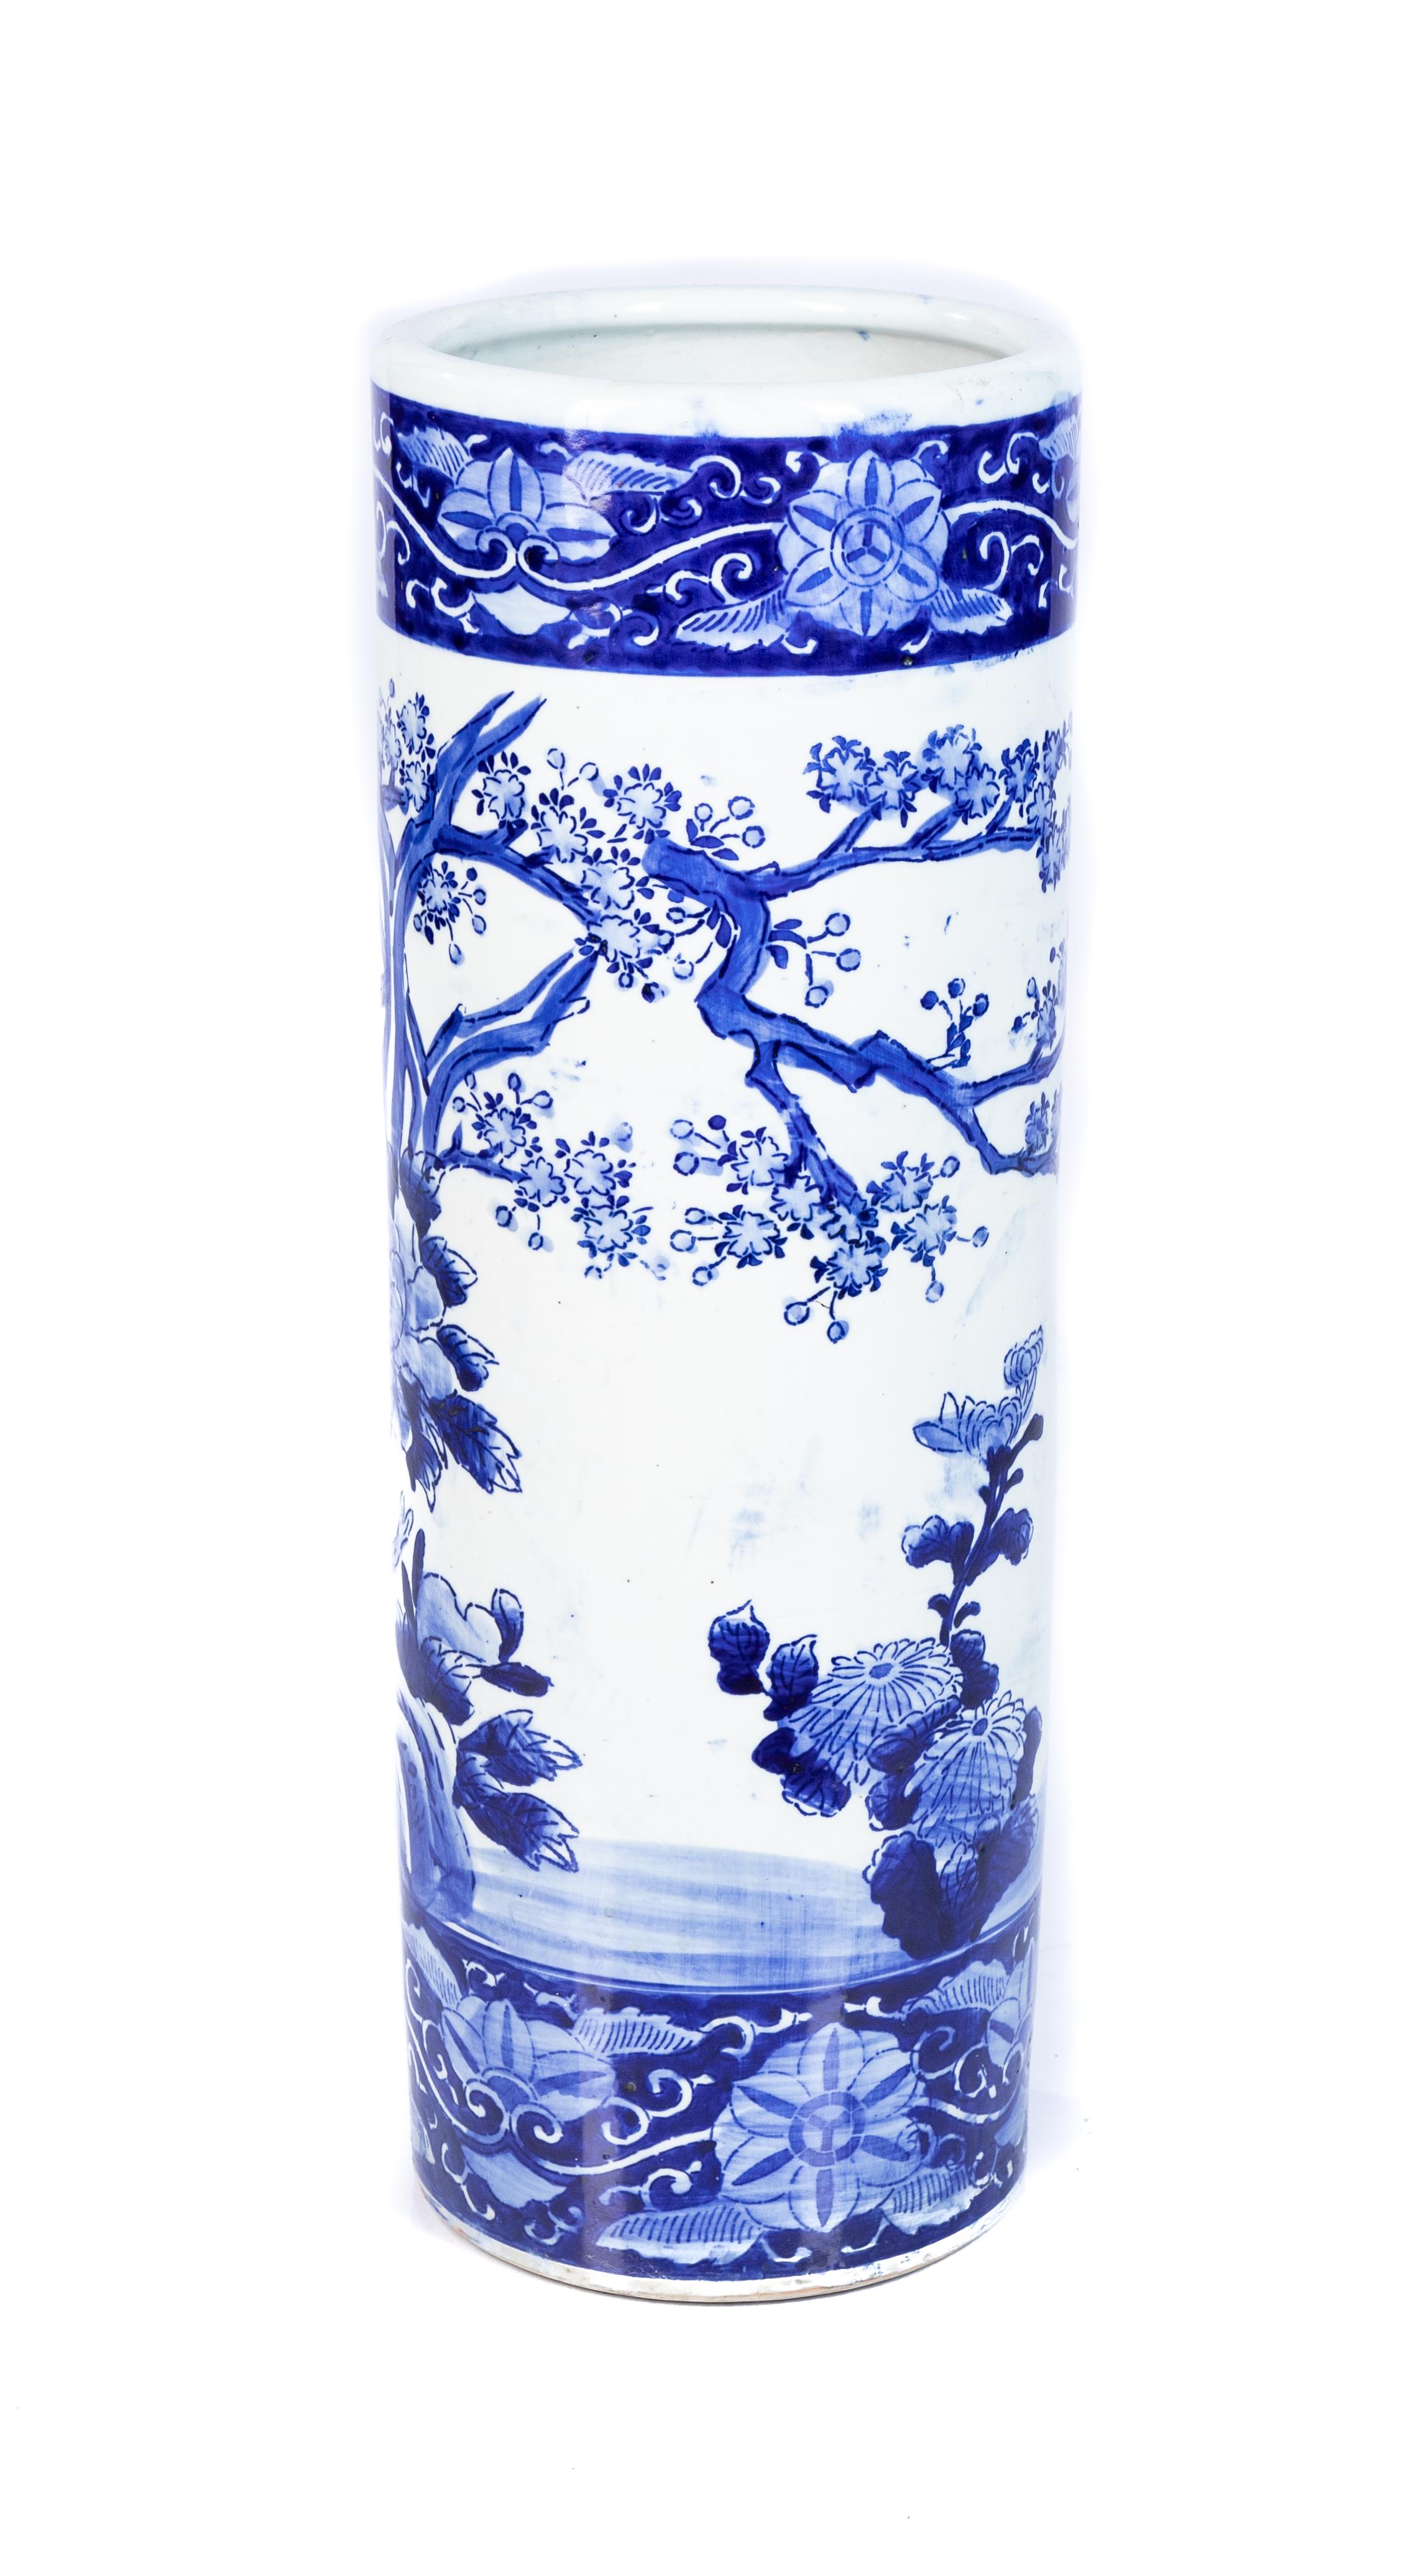 Offering this stunning blue and white Chinese umbrella stand. With hand painted floral, birds, and other motifs it will fit beautifully at any entry of your home.